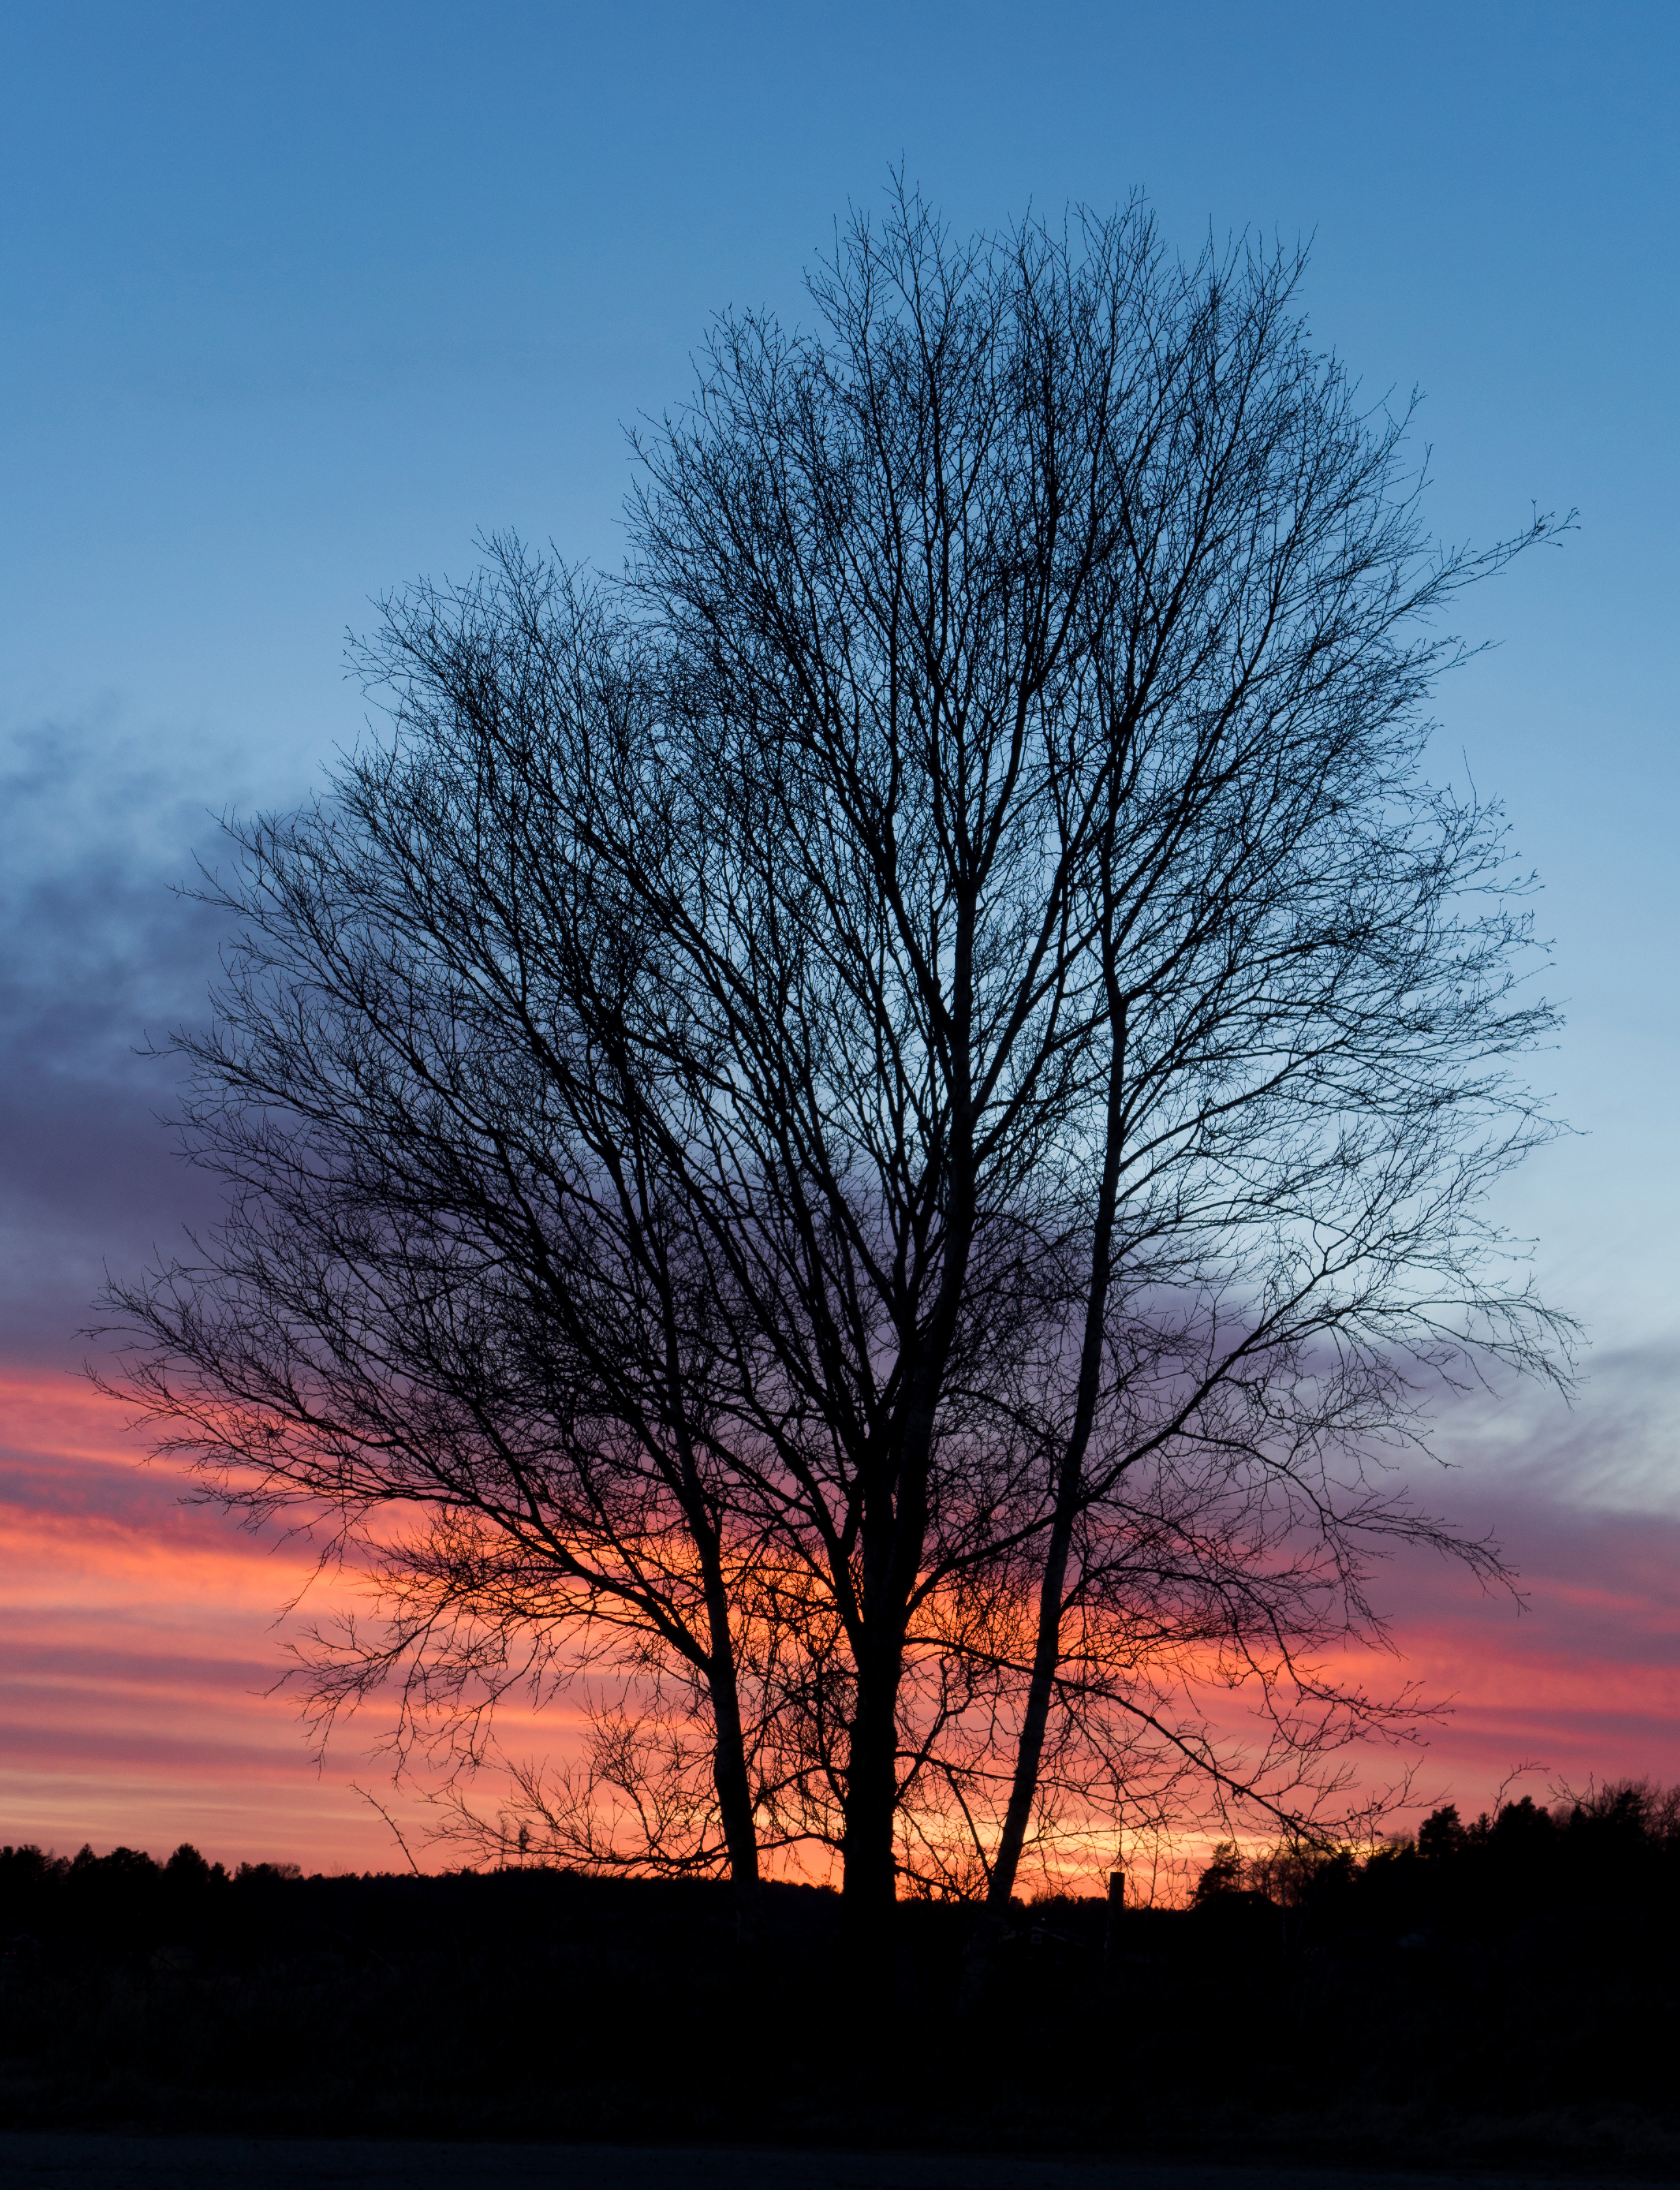 Sunset with tree